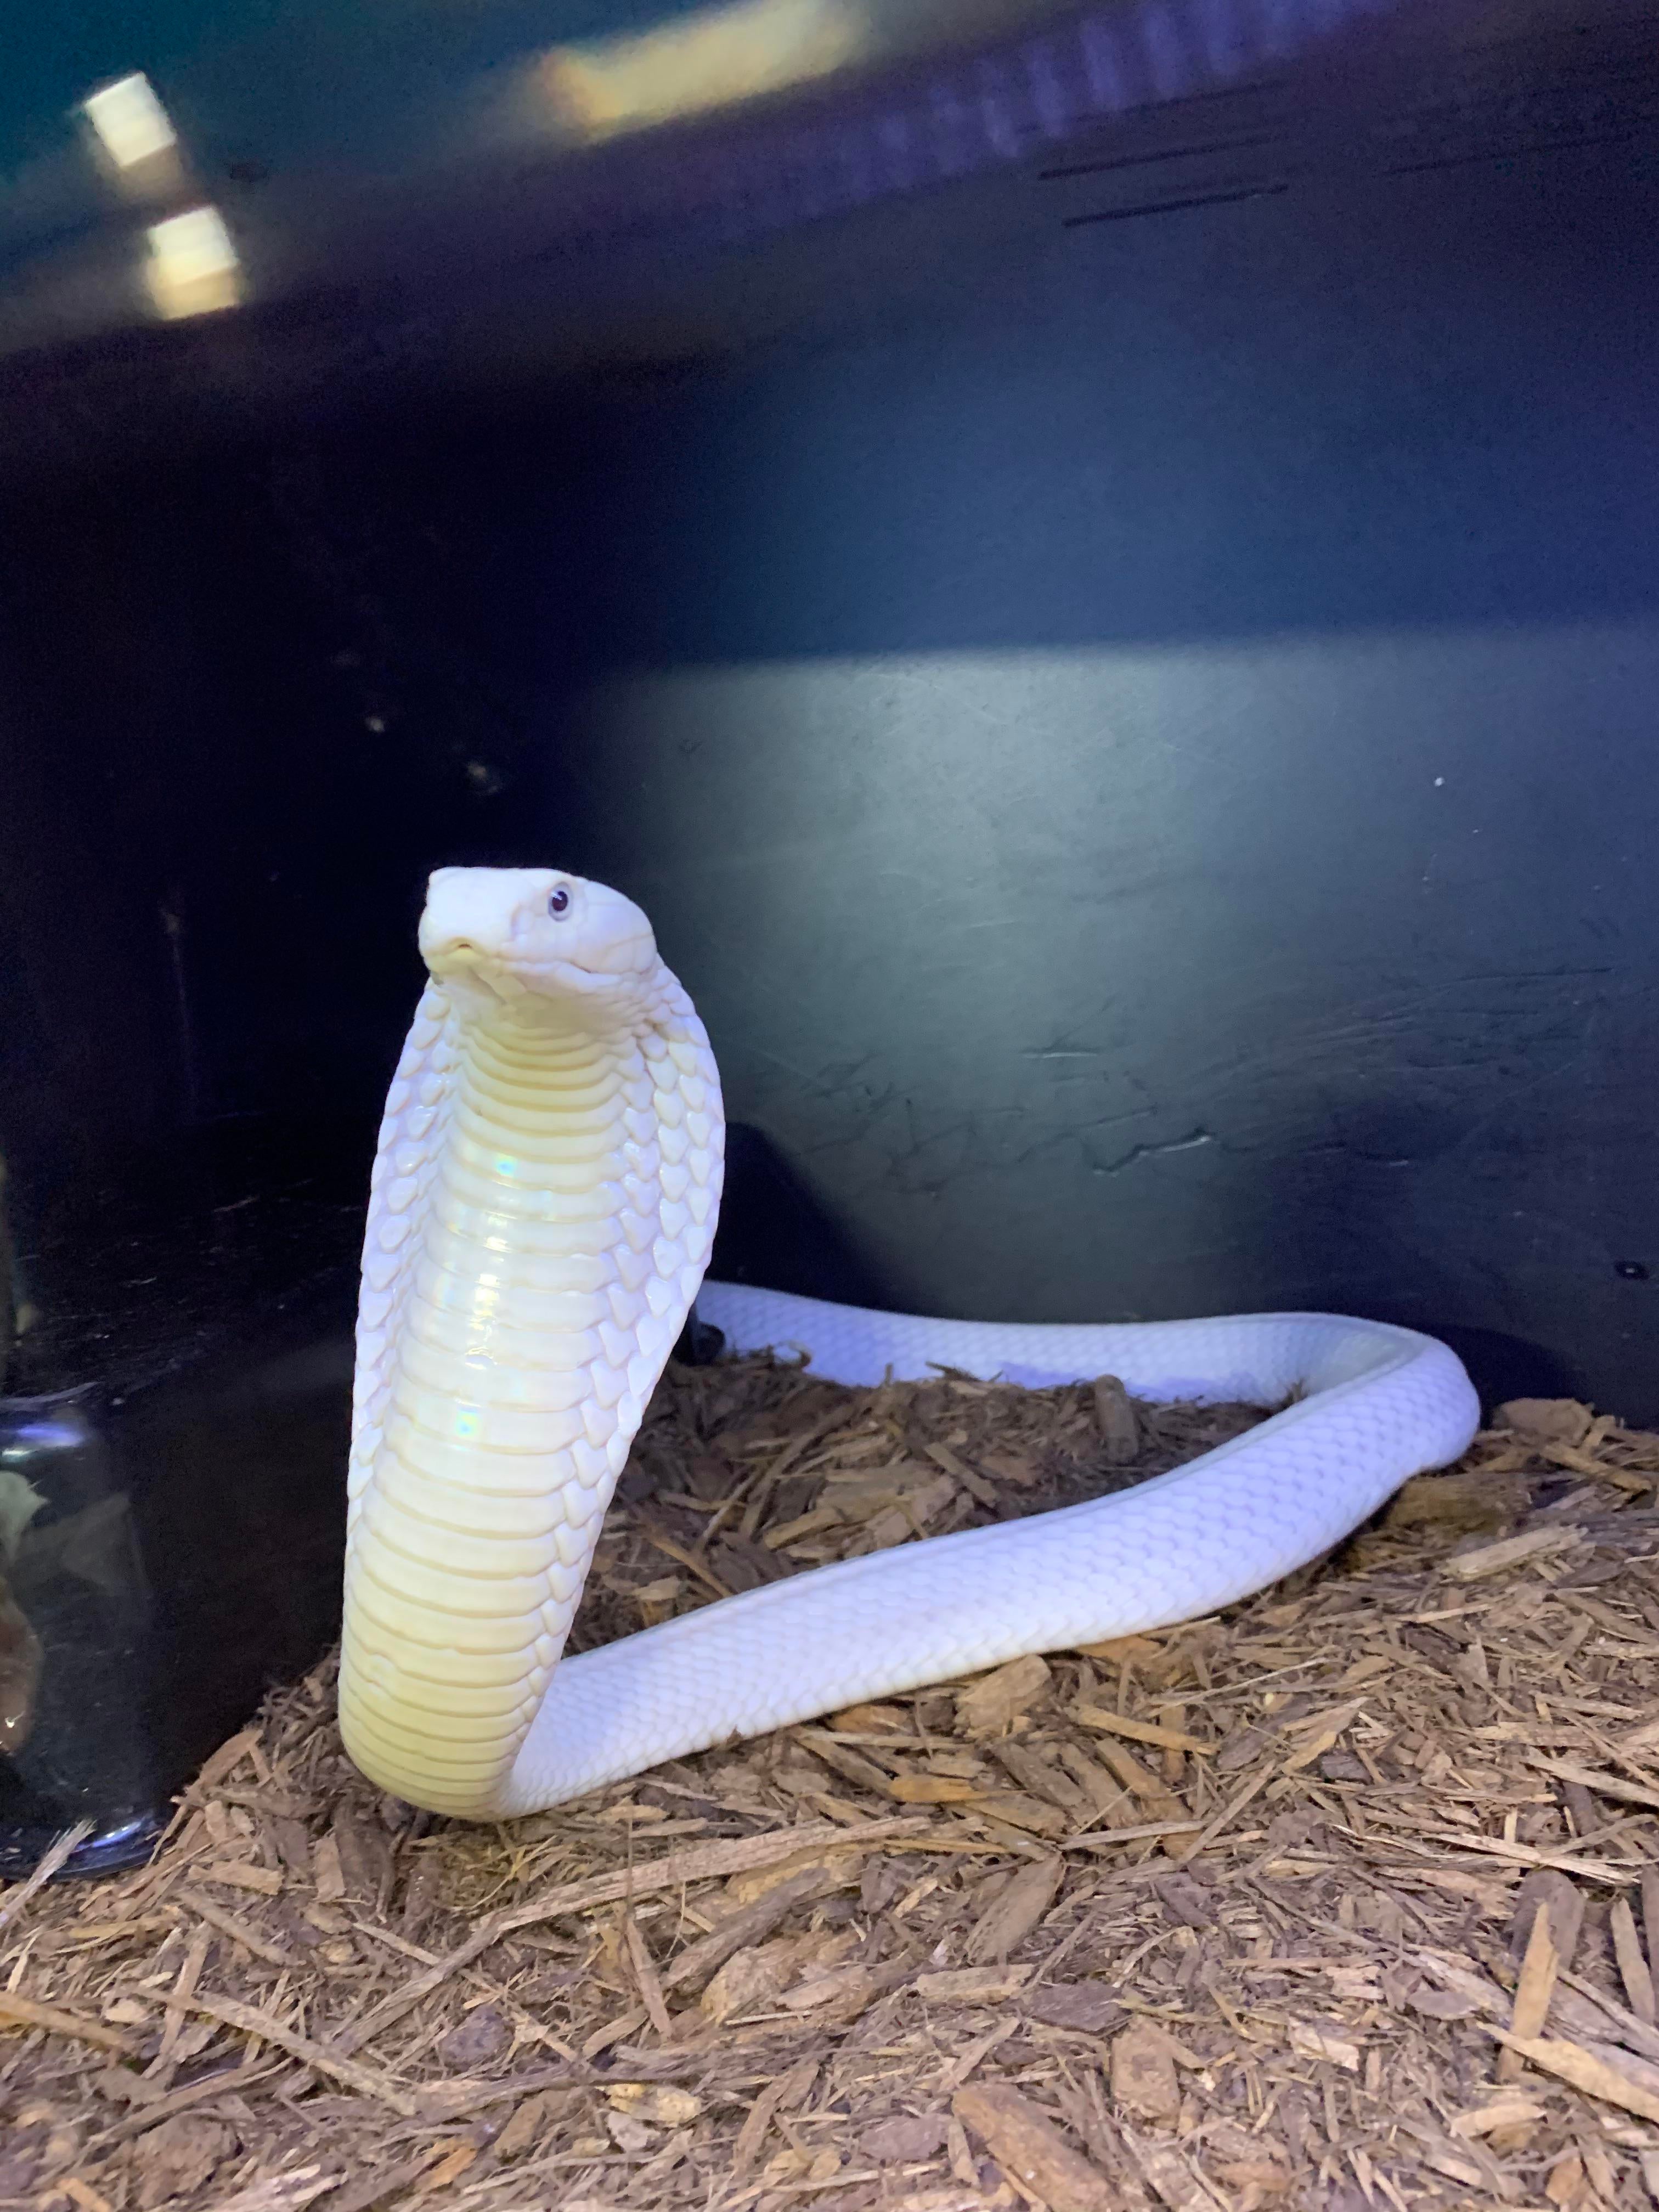 How Much Does a White King Cobra Cost?